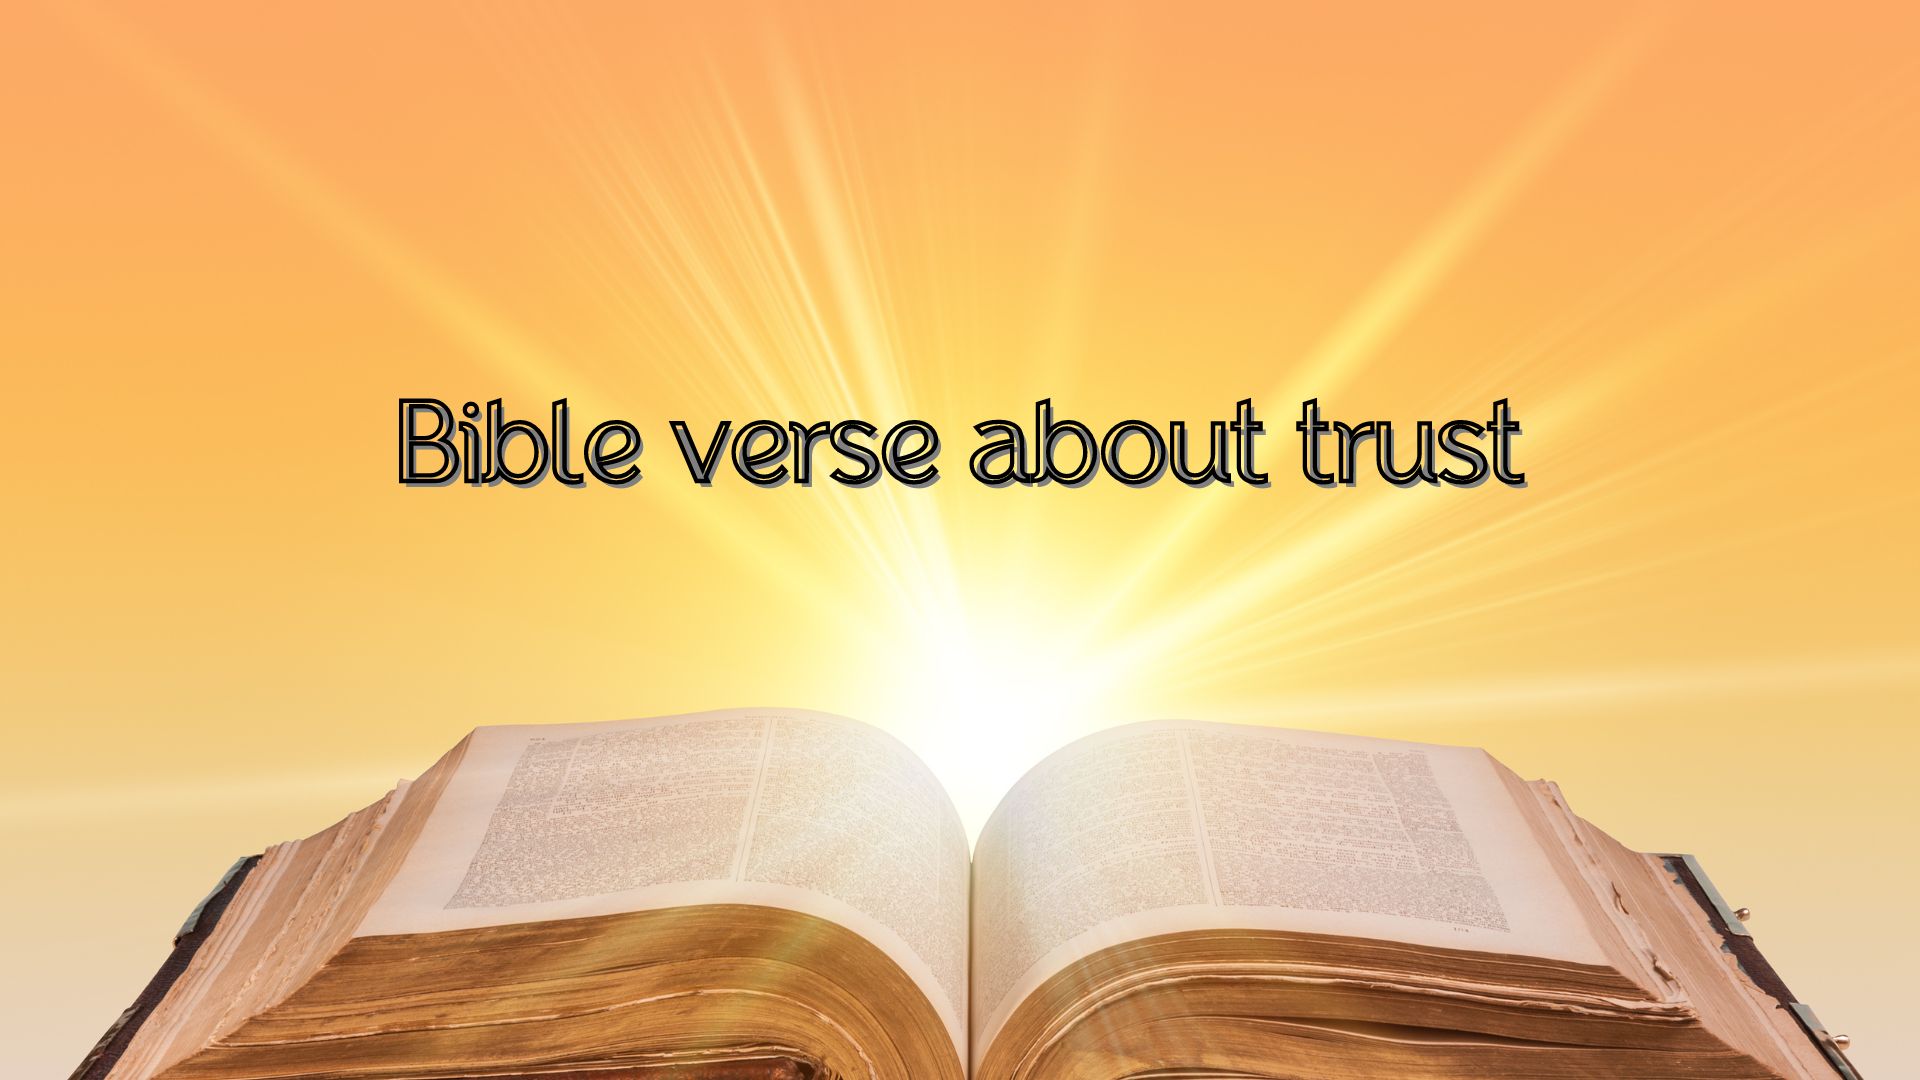 Bible verse about trust